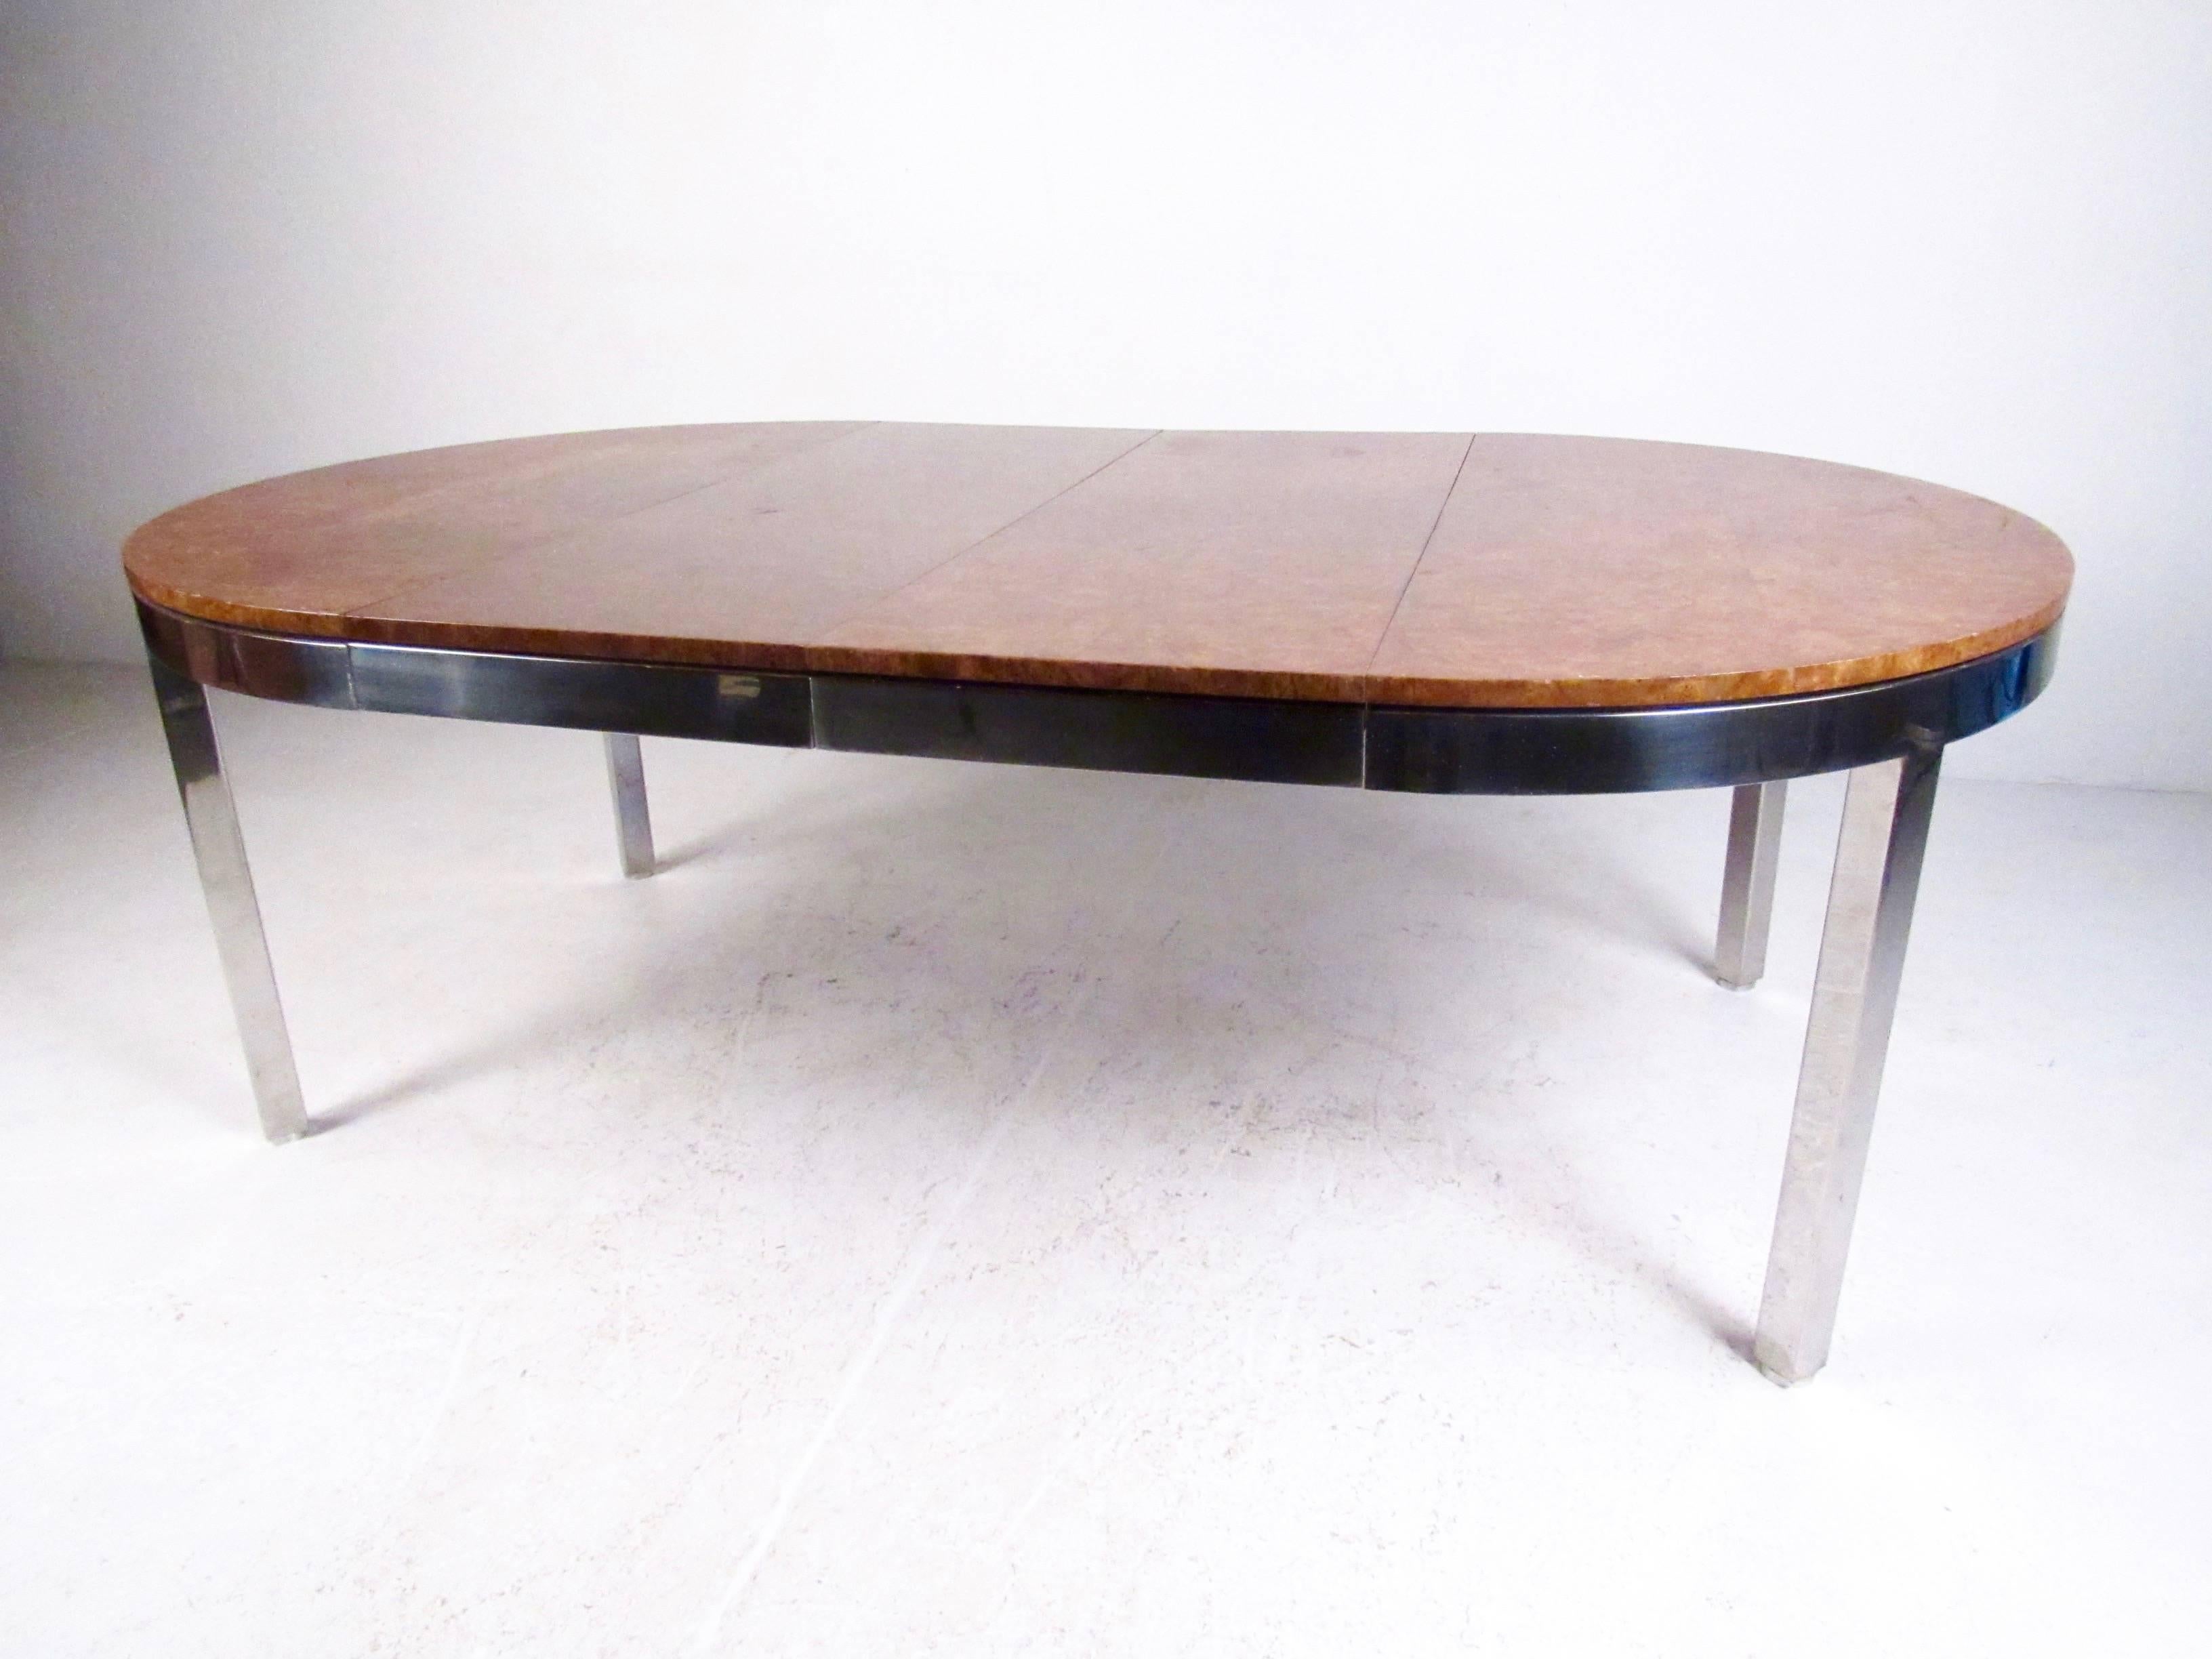 This stunning chrome frame dining table features heavy quality construction with rich vintage burl finish. Designed in the midcentury style of Milo Baughman, this circular dining table accommodates two leaves and expands from 48 inches in diameter